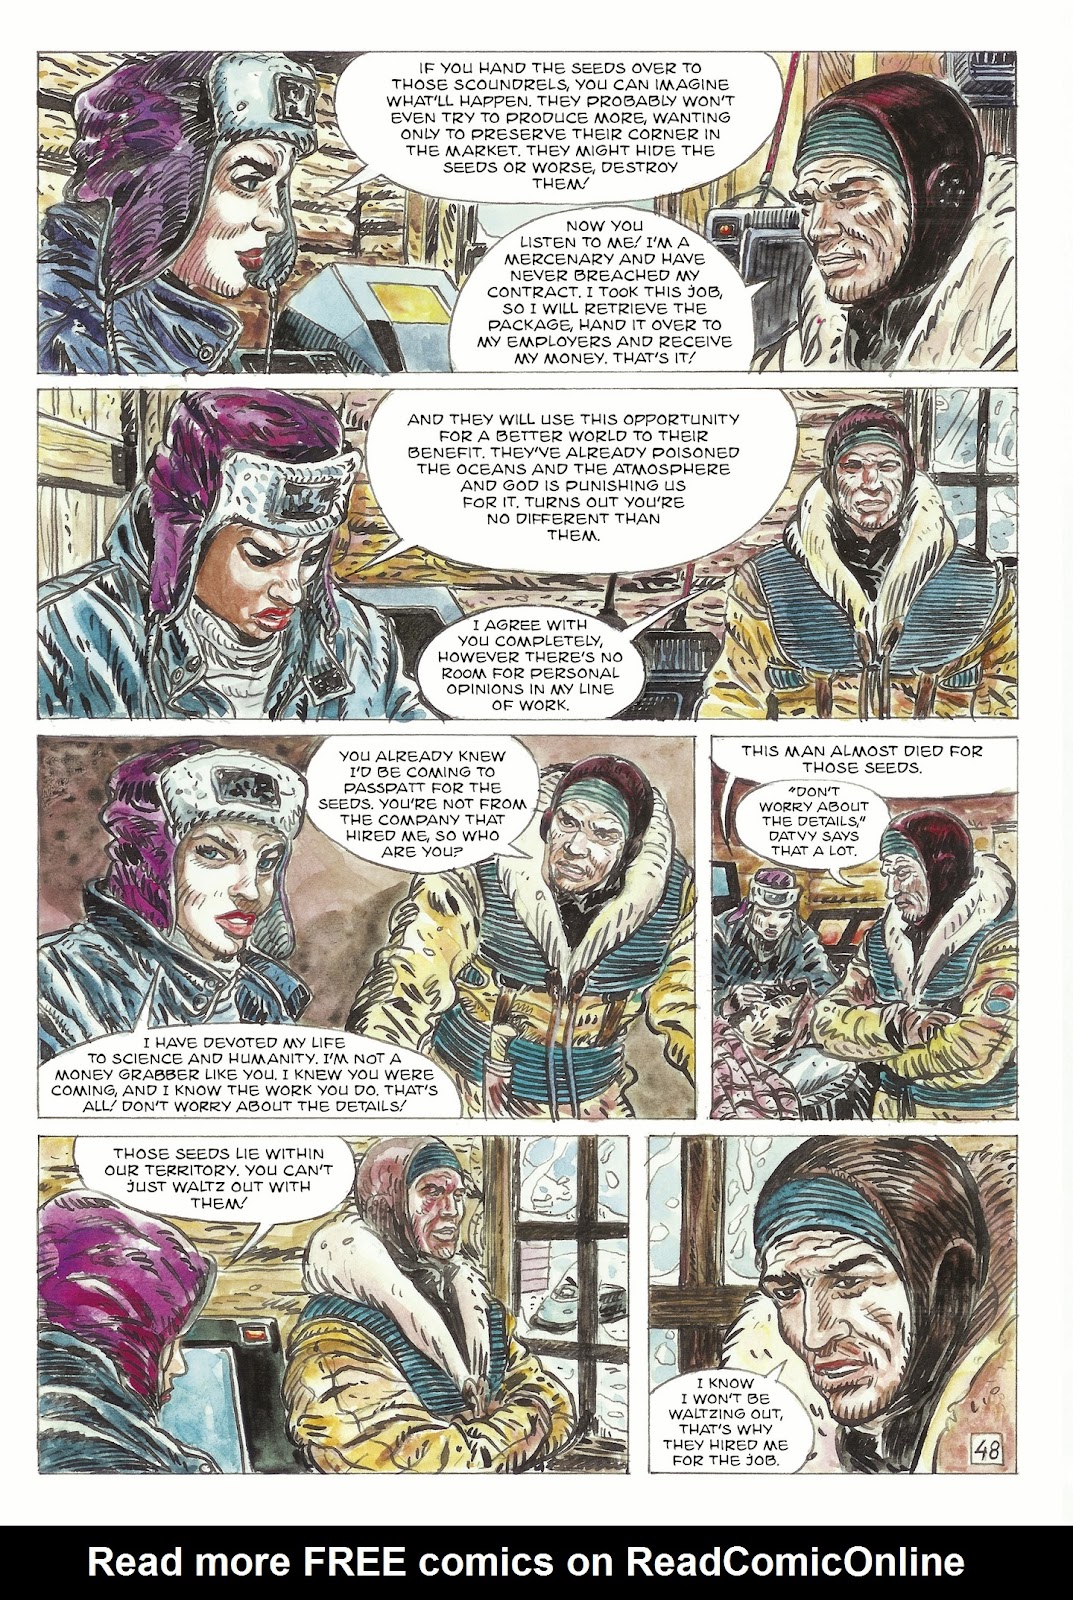 The Man With the Bear issue 1 - Page 50